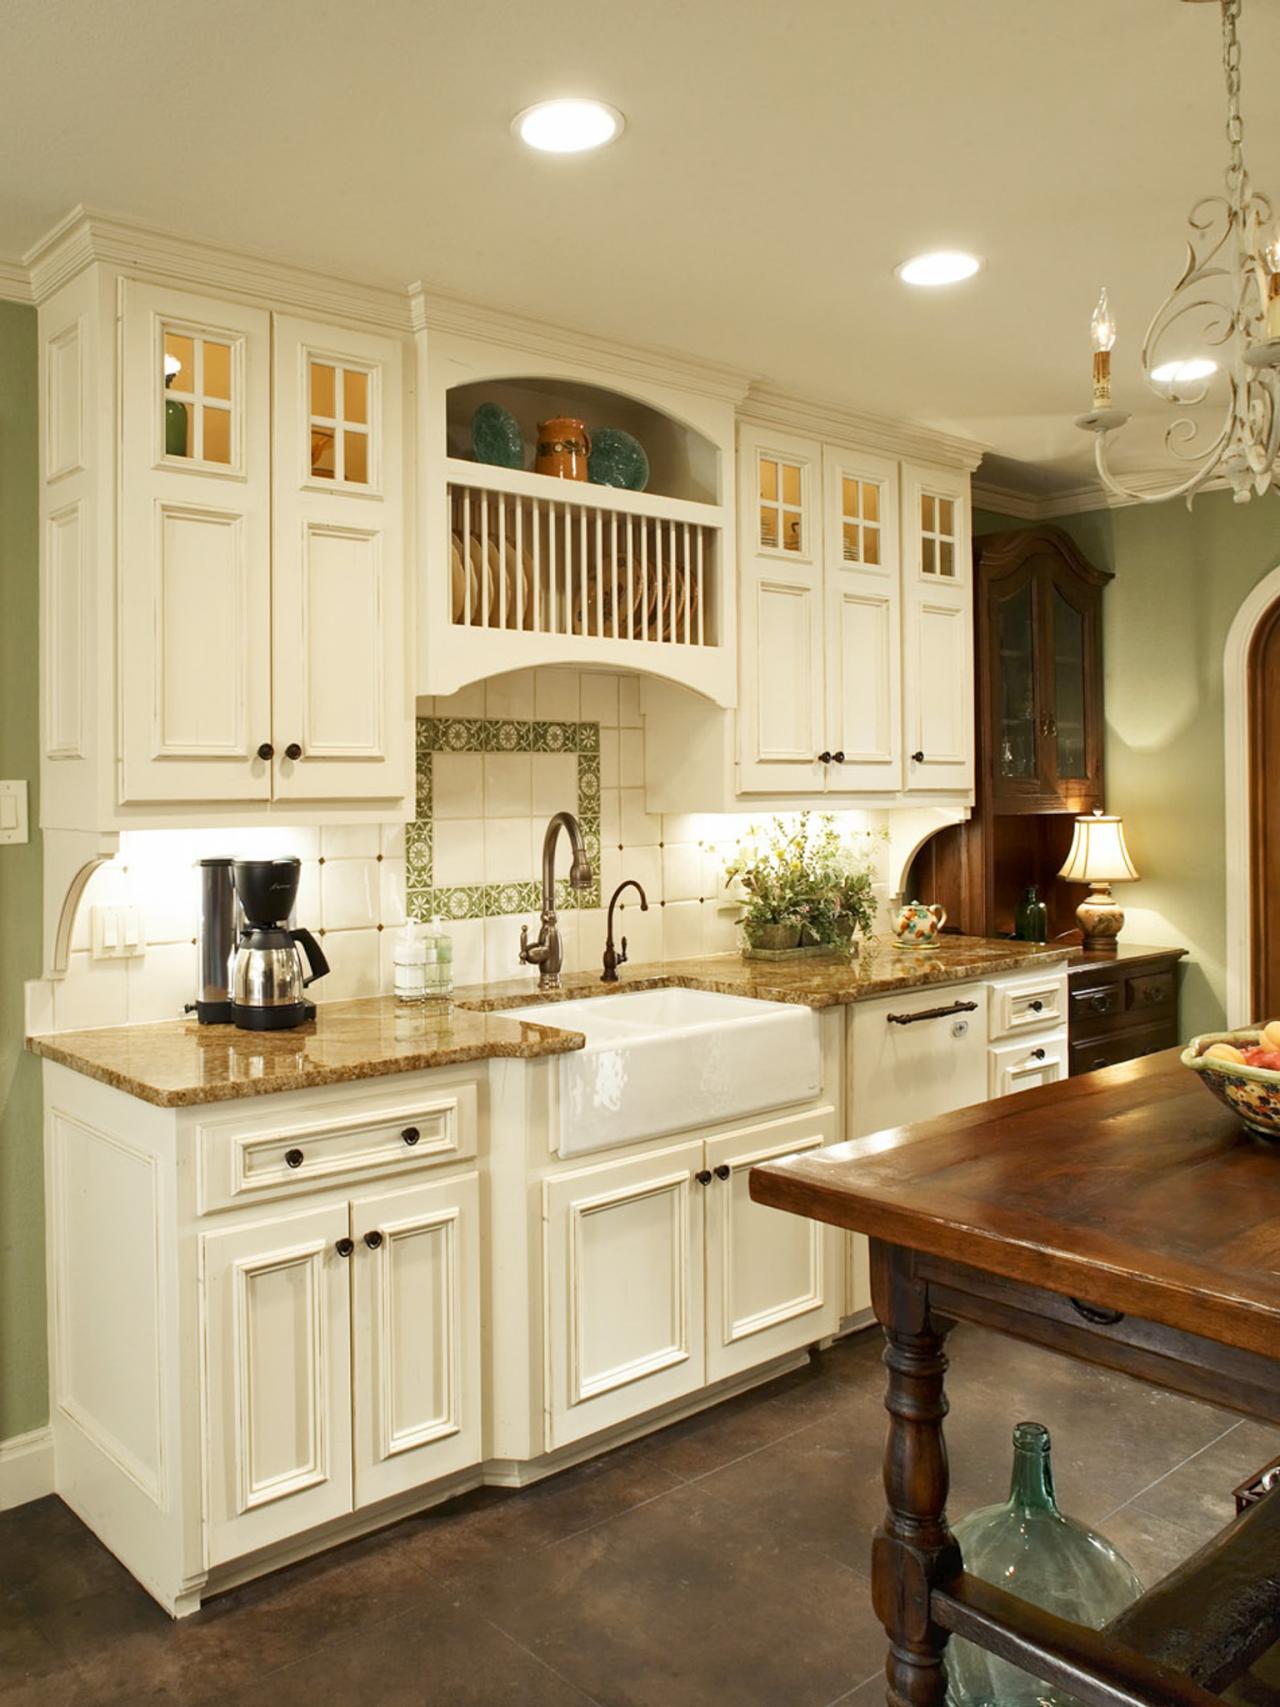 french country kitchen photos photo - 8